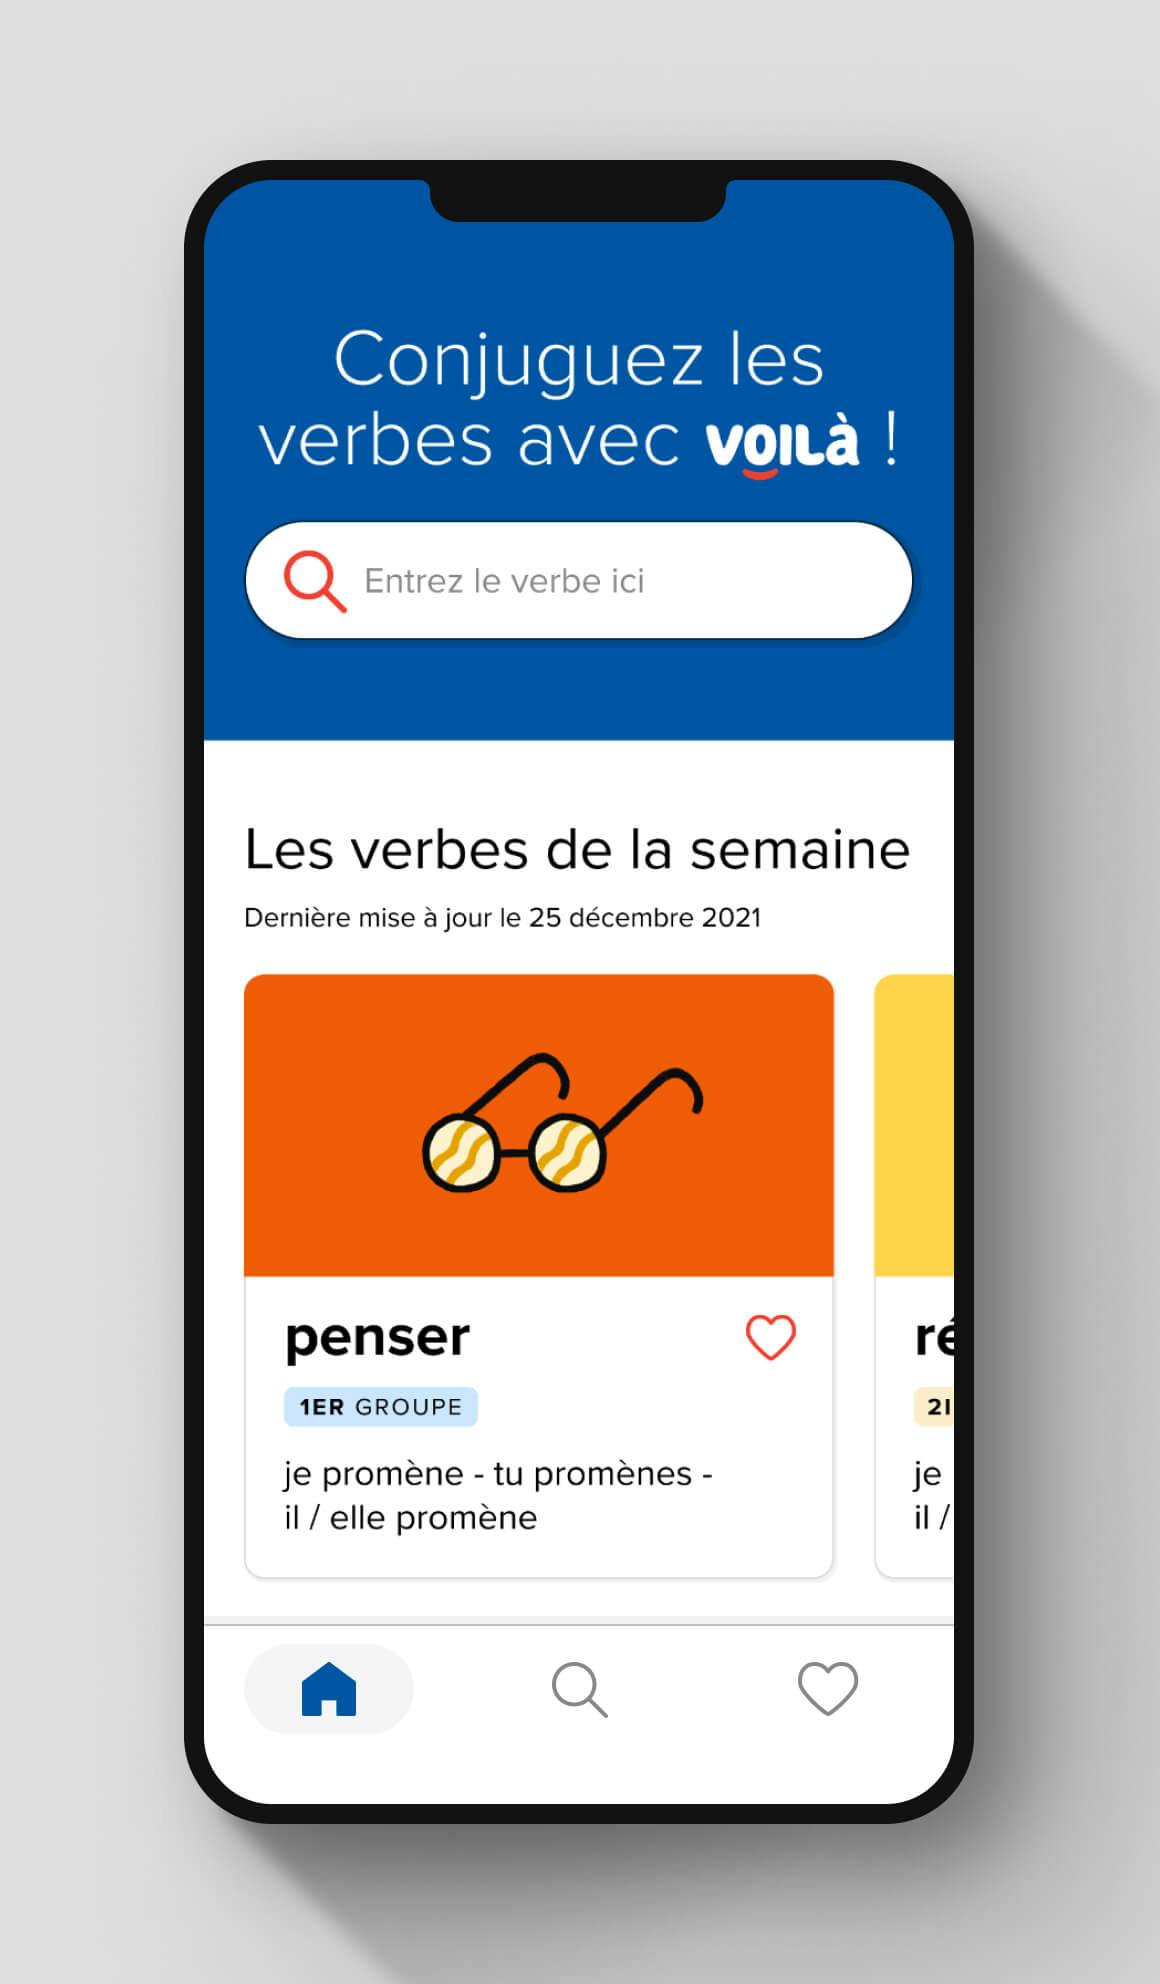 The Voilà home screen with the global search bar and a preview of the verbs of the week section. The home button is selected at the bottom of the navigation bar.